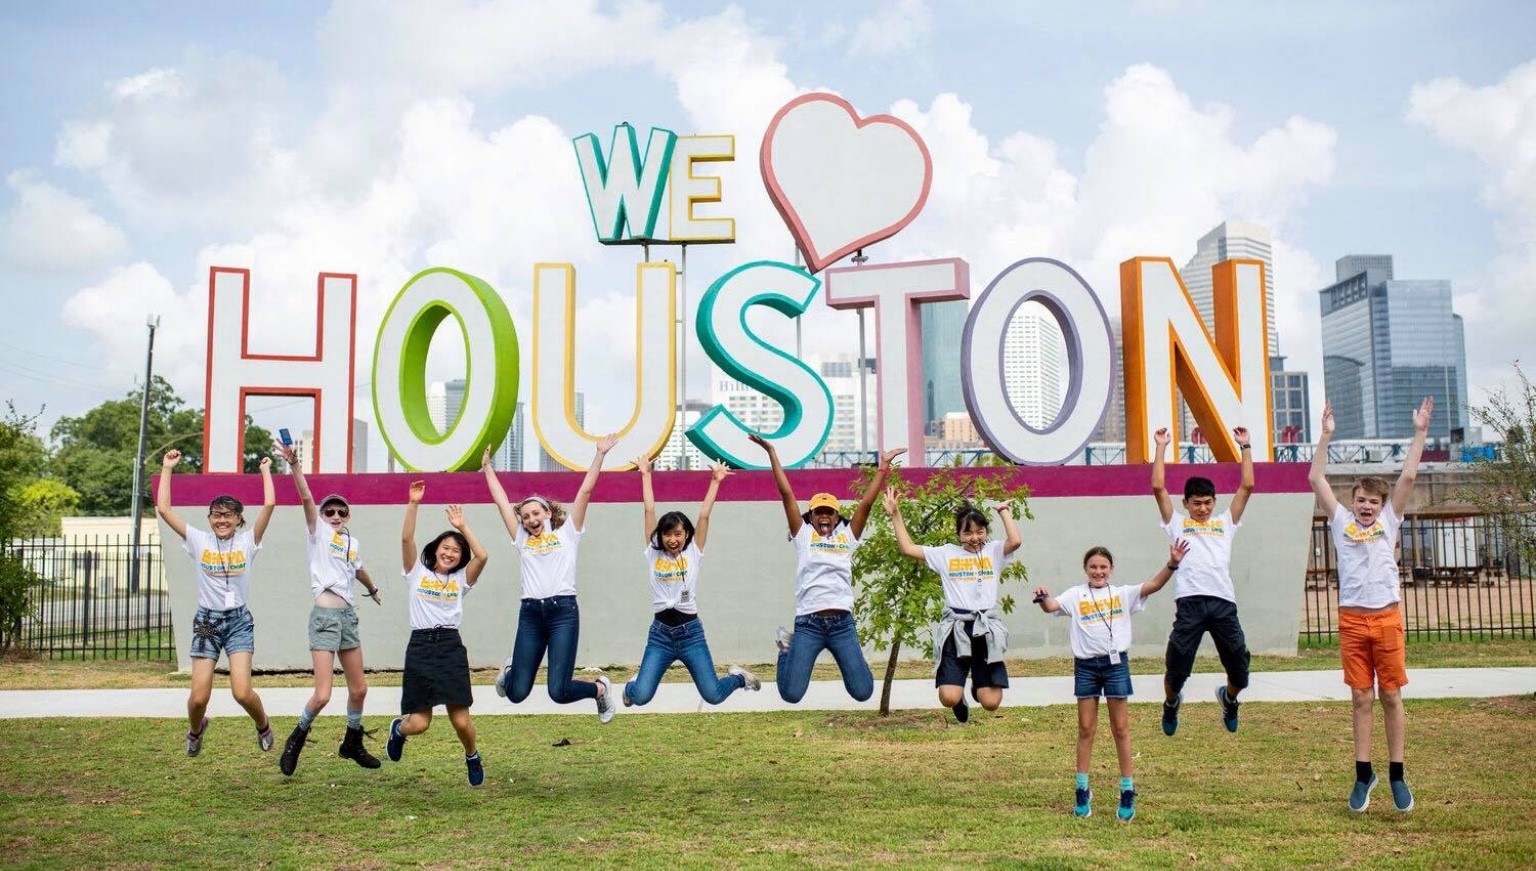 A group of students of ROBS jumping in the air in front of a "We Love Houston" sign